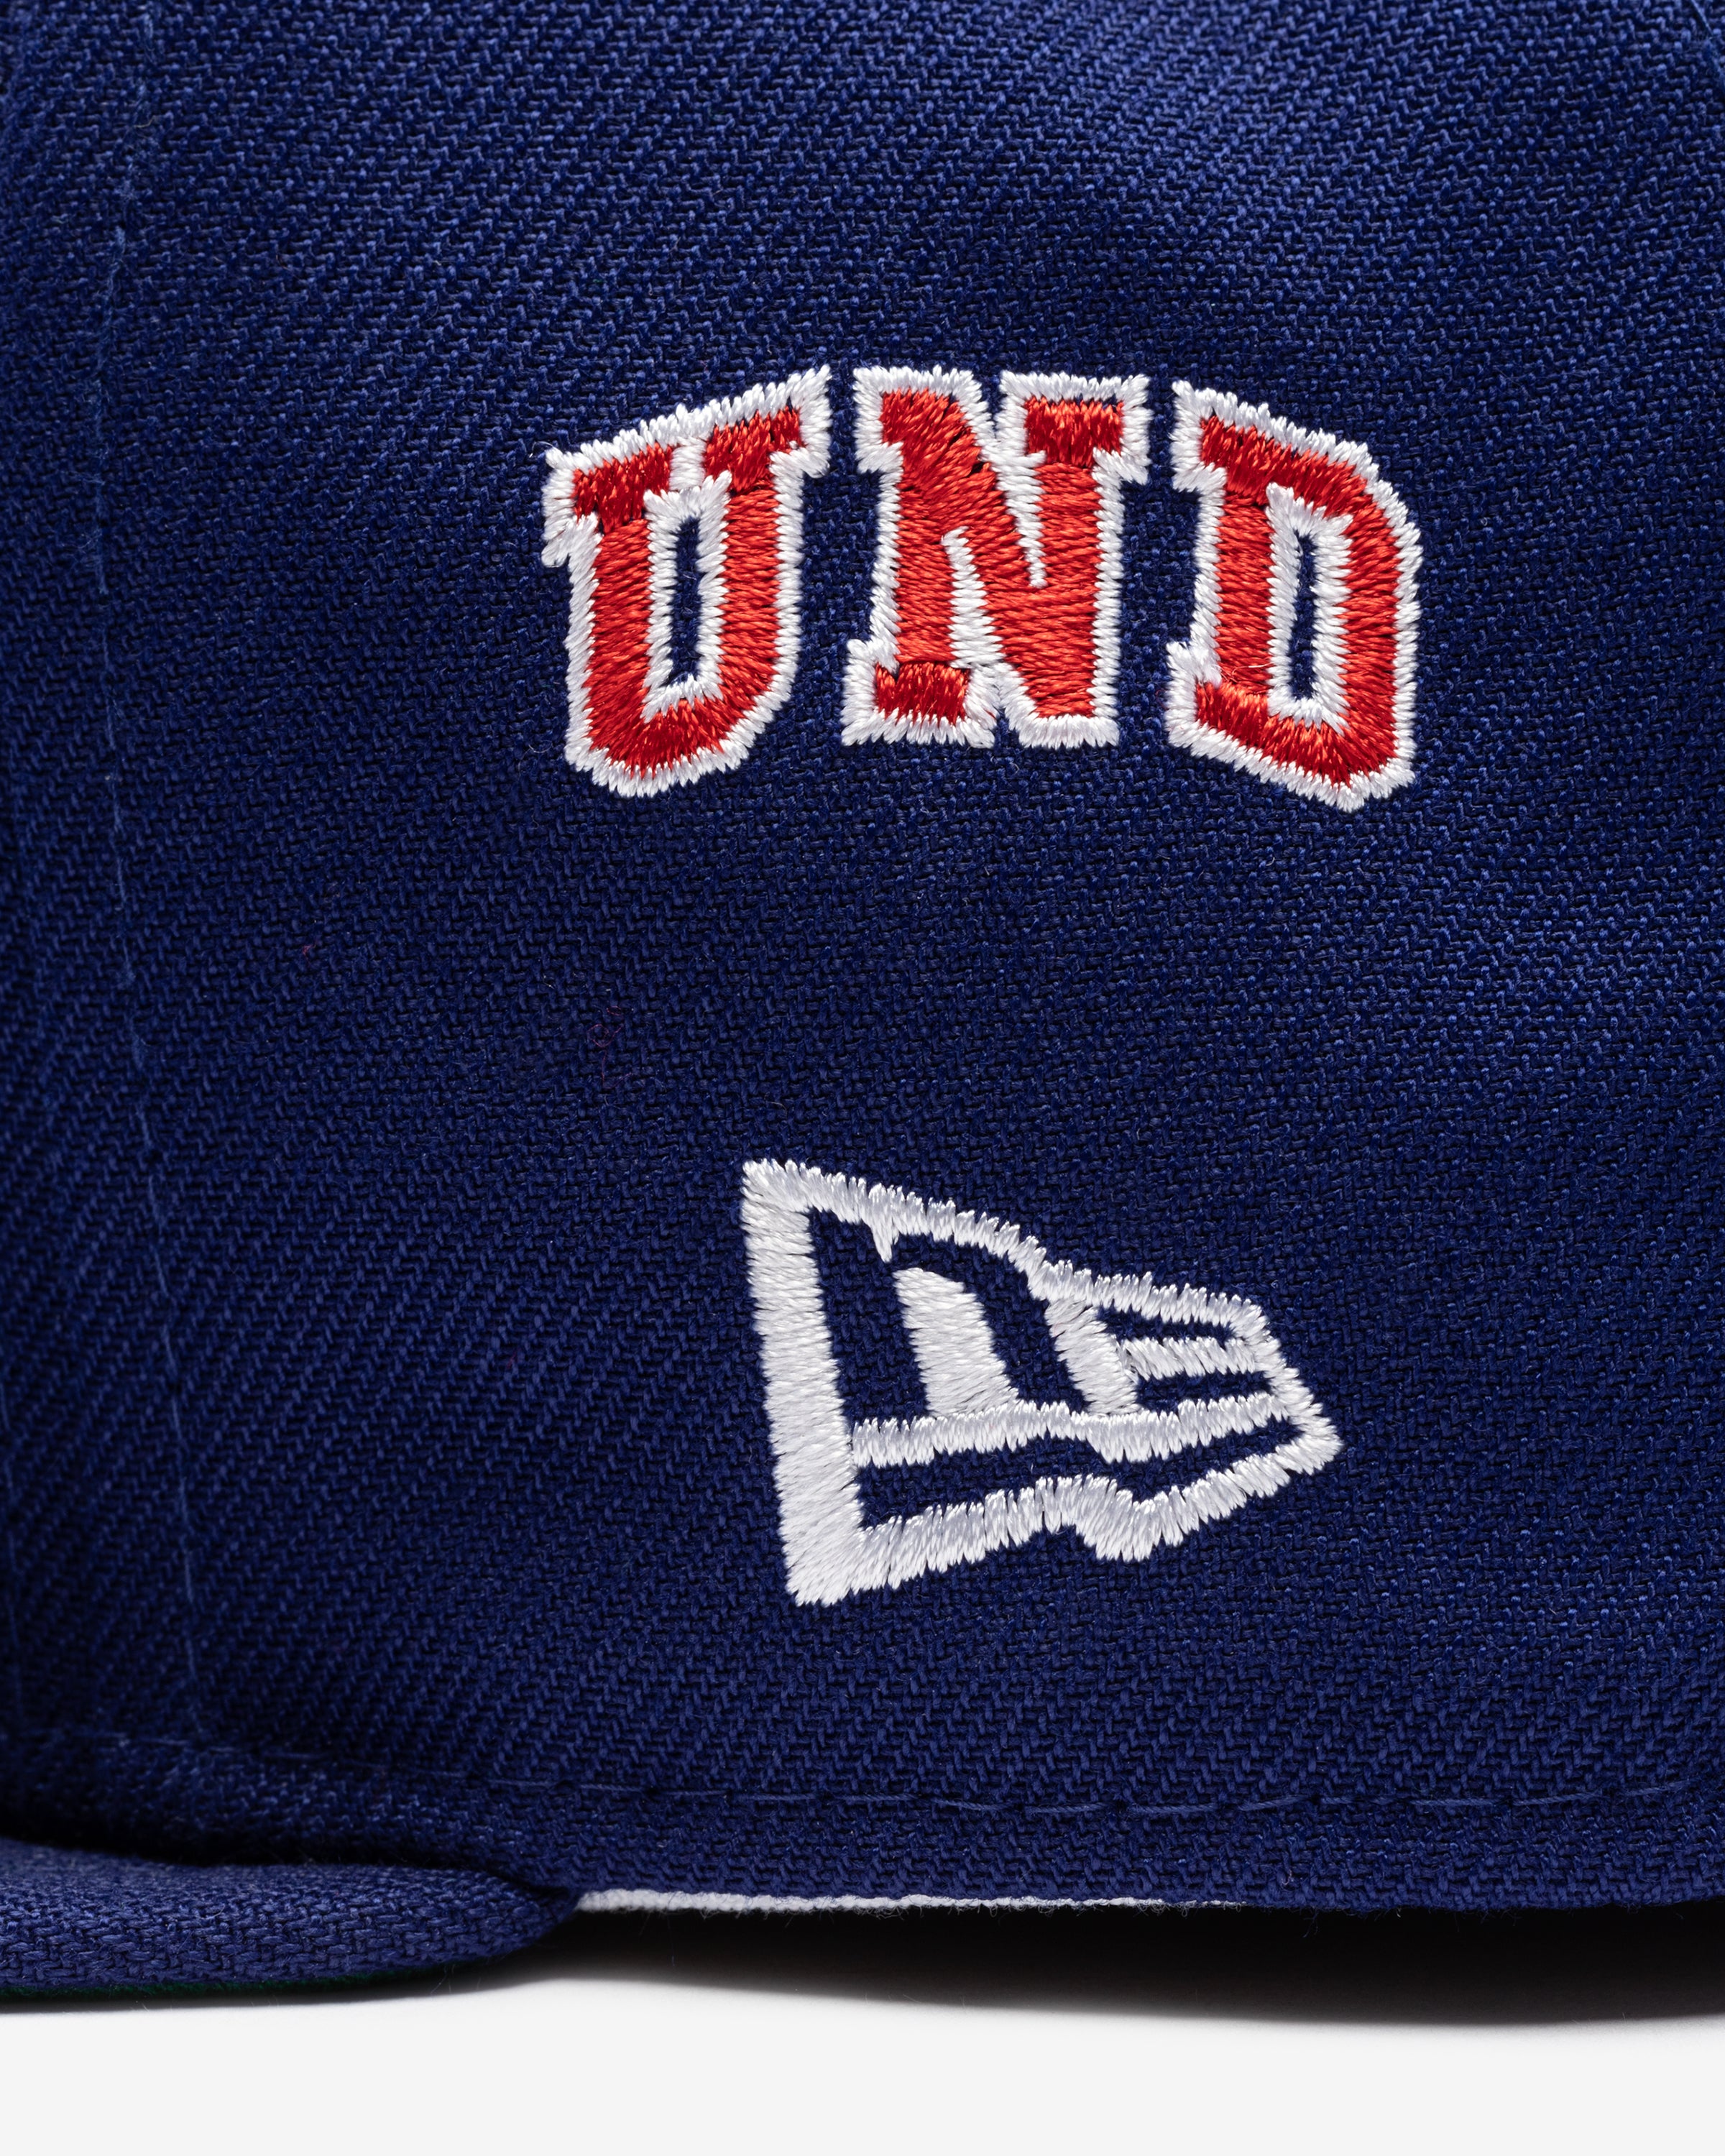 UNDEFEATED X NE X MLB FITTED - TEXAS RANGERS